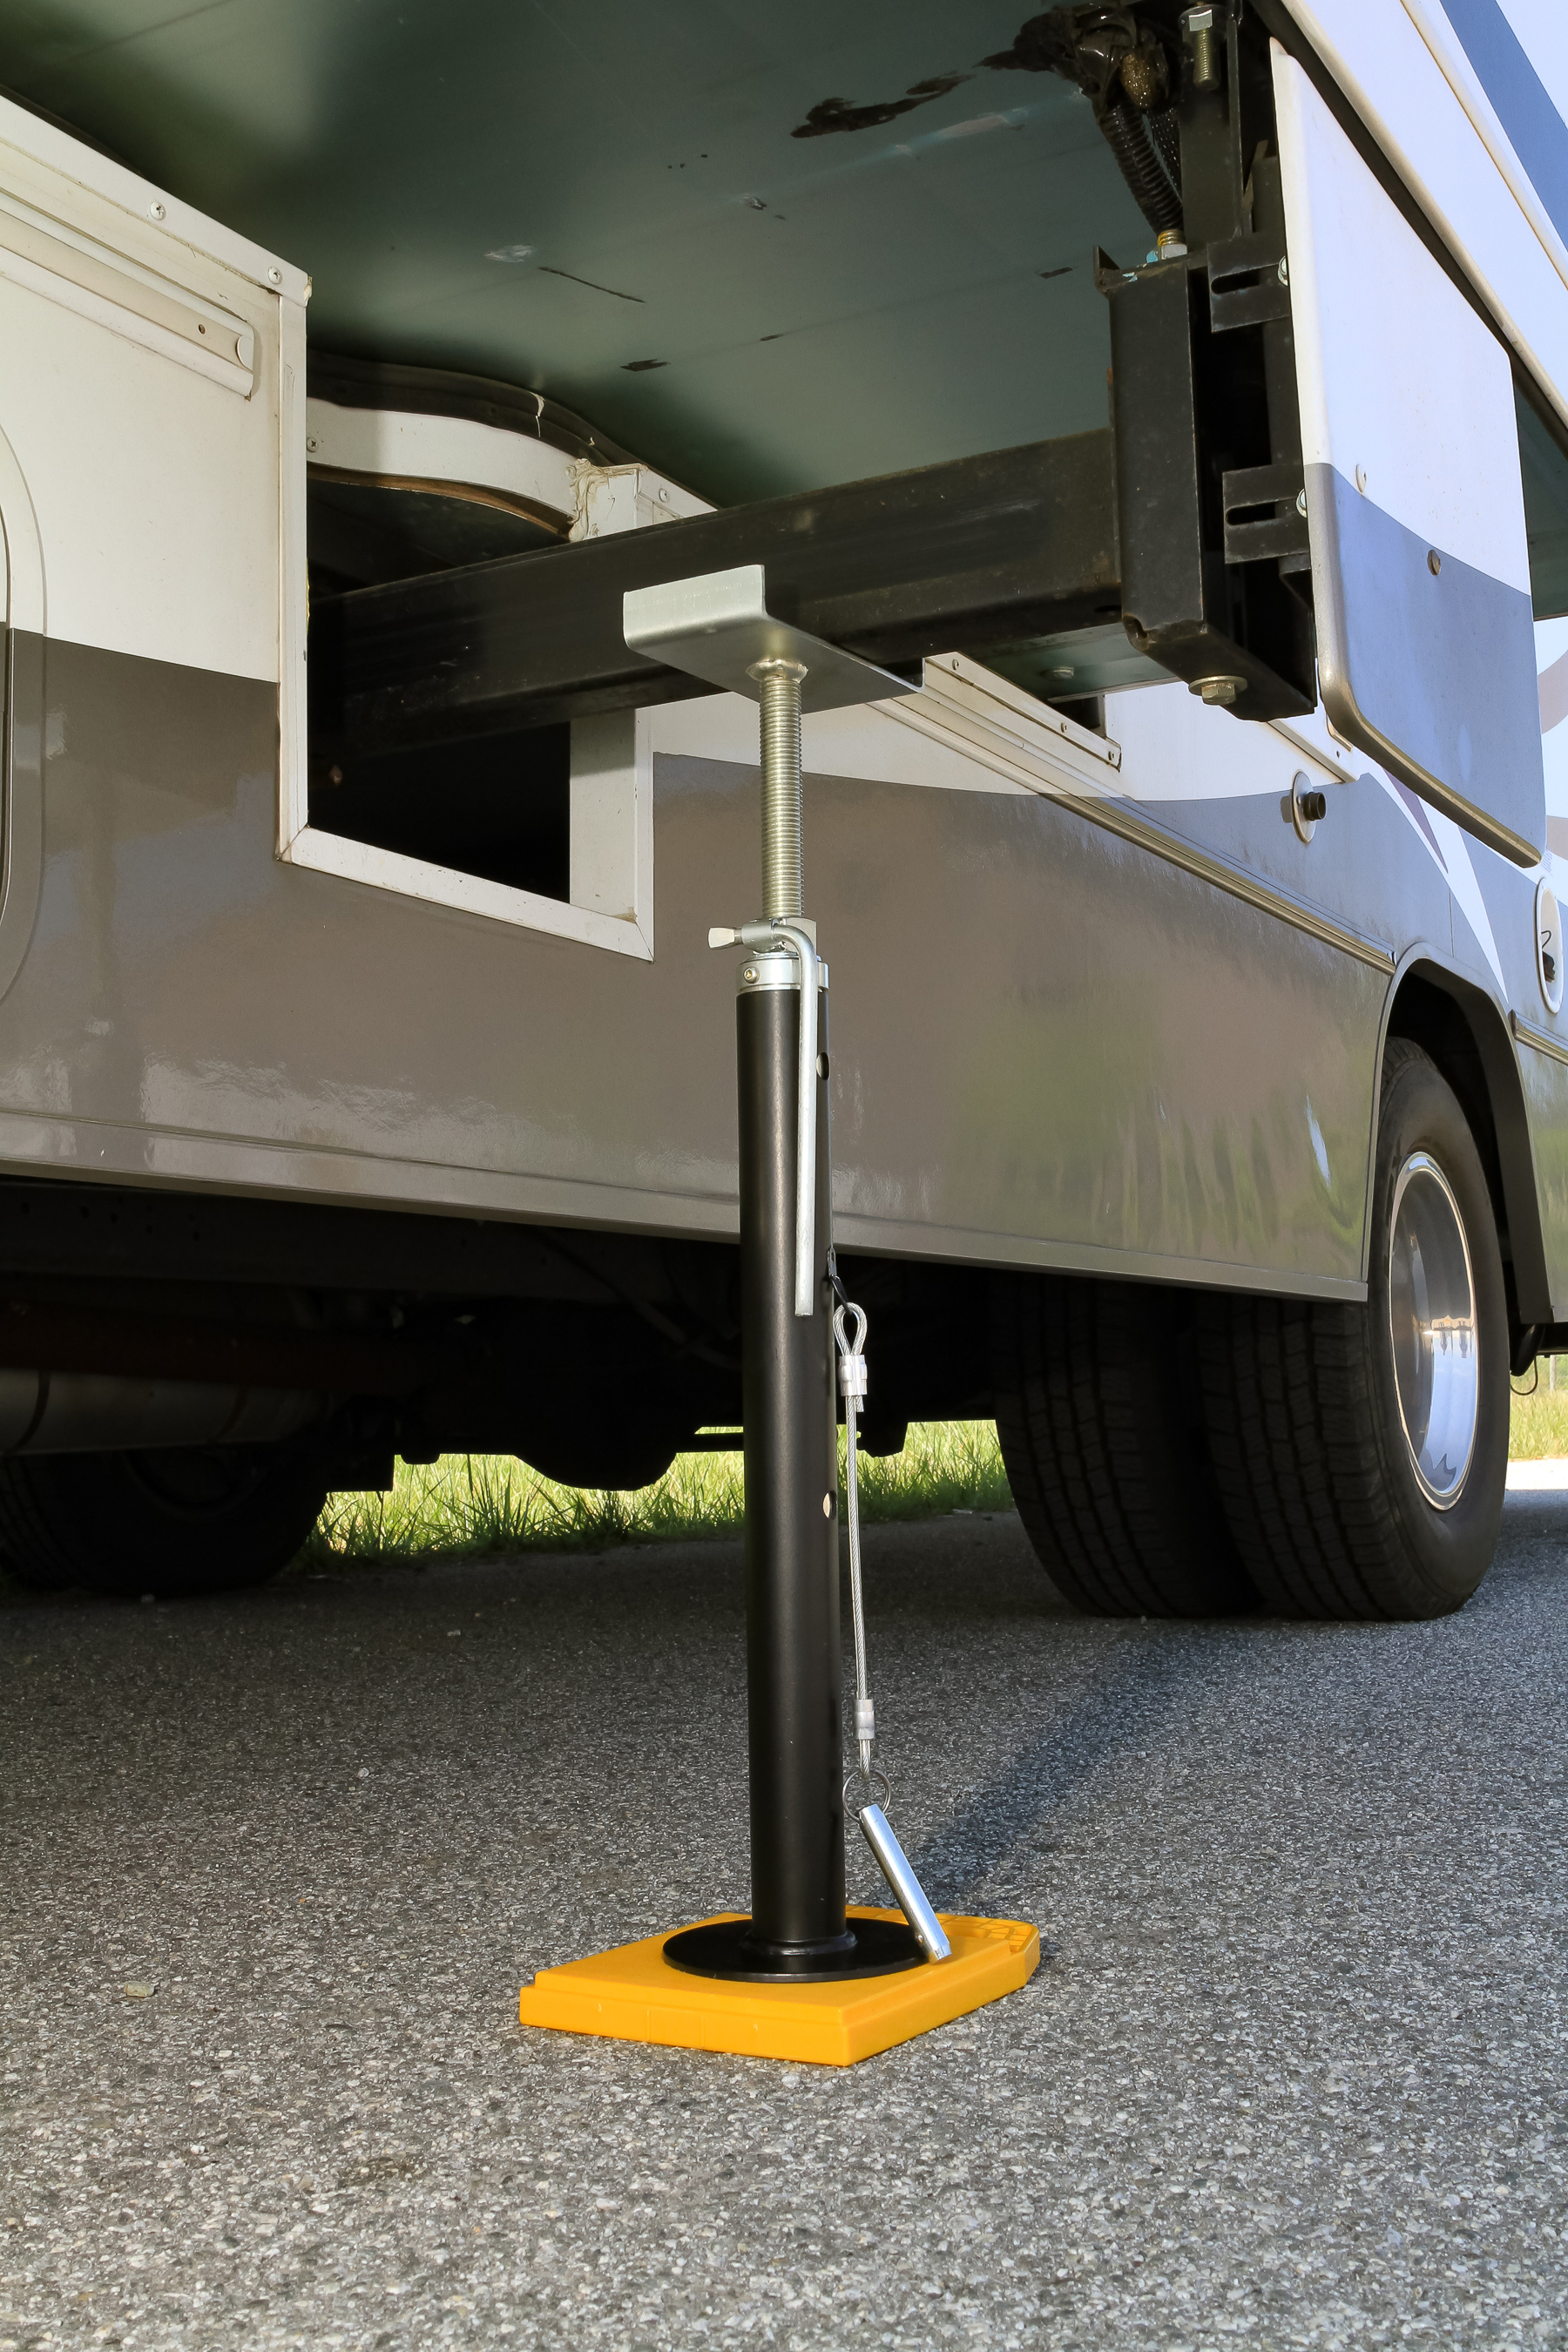 Camco Eaz-Lift Premium RV Slide-Out Support | Adjusts from 19 to 47-inches High | Holds up to 5,000 lbs. Each | Durable Steel, Black and Silver (48867) - image 6 of 9